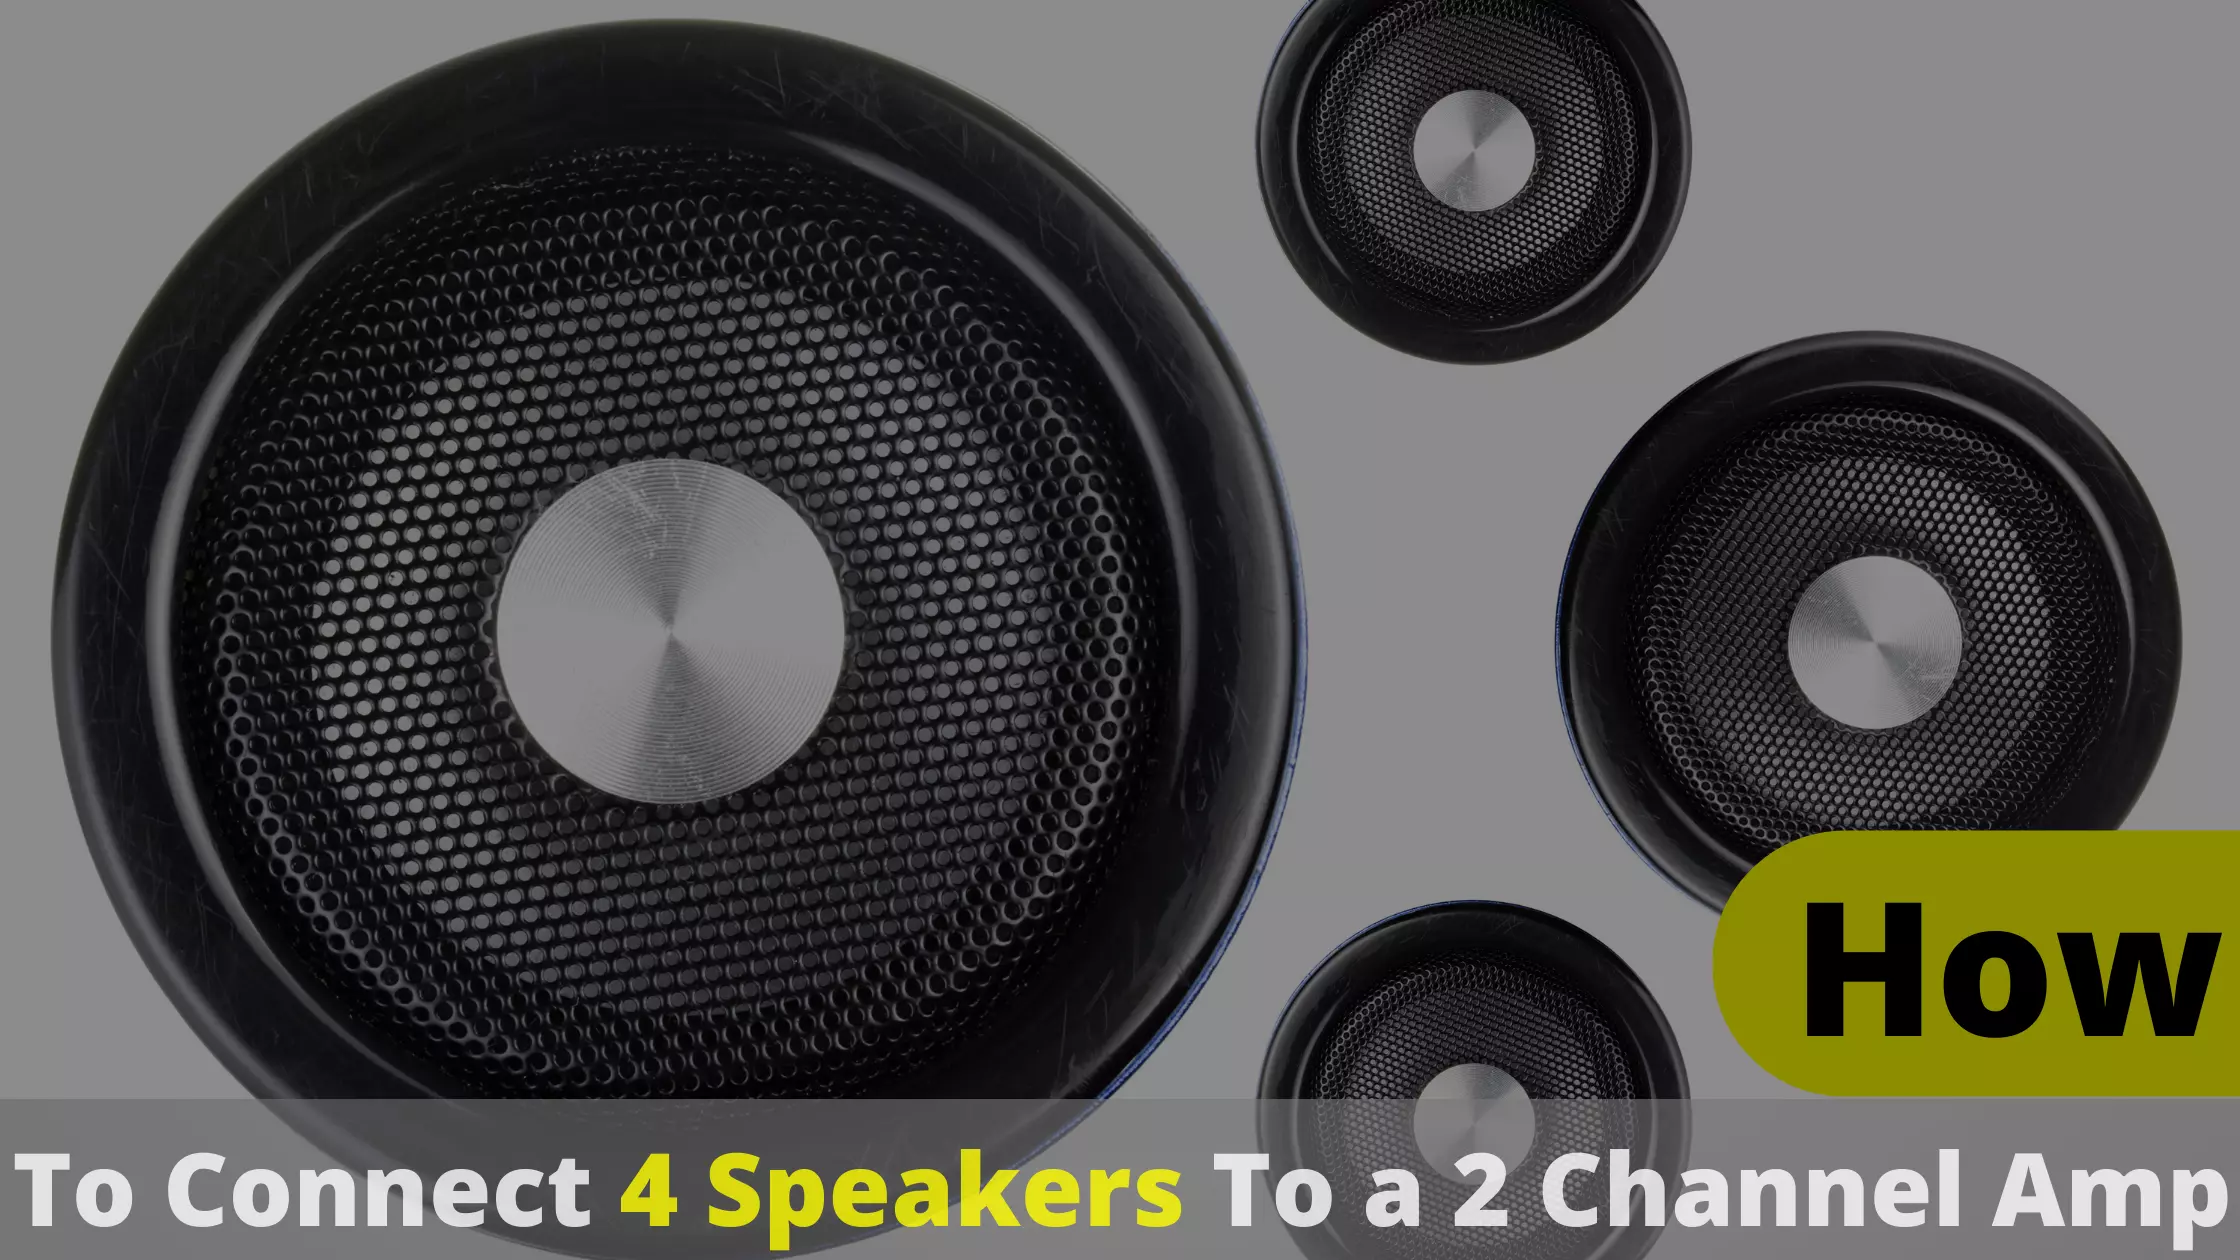 How to Connect 4 Speakers to a 2 Channel Amp? A Comprehensive Guide